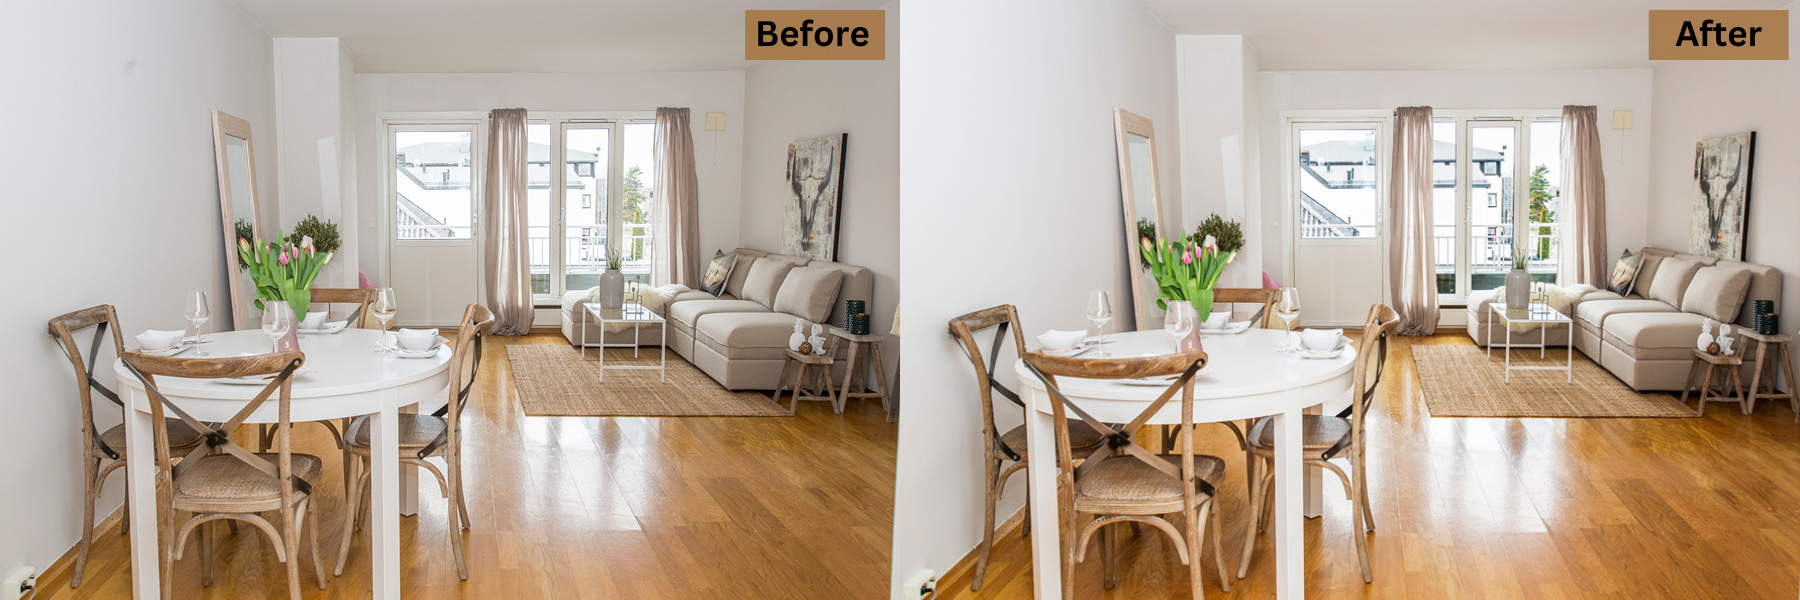 real estate photo retouching services